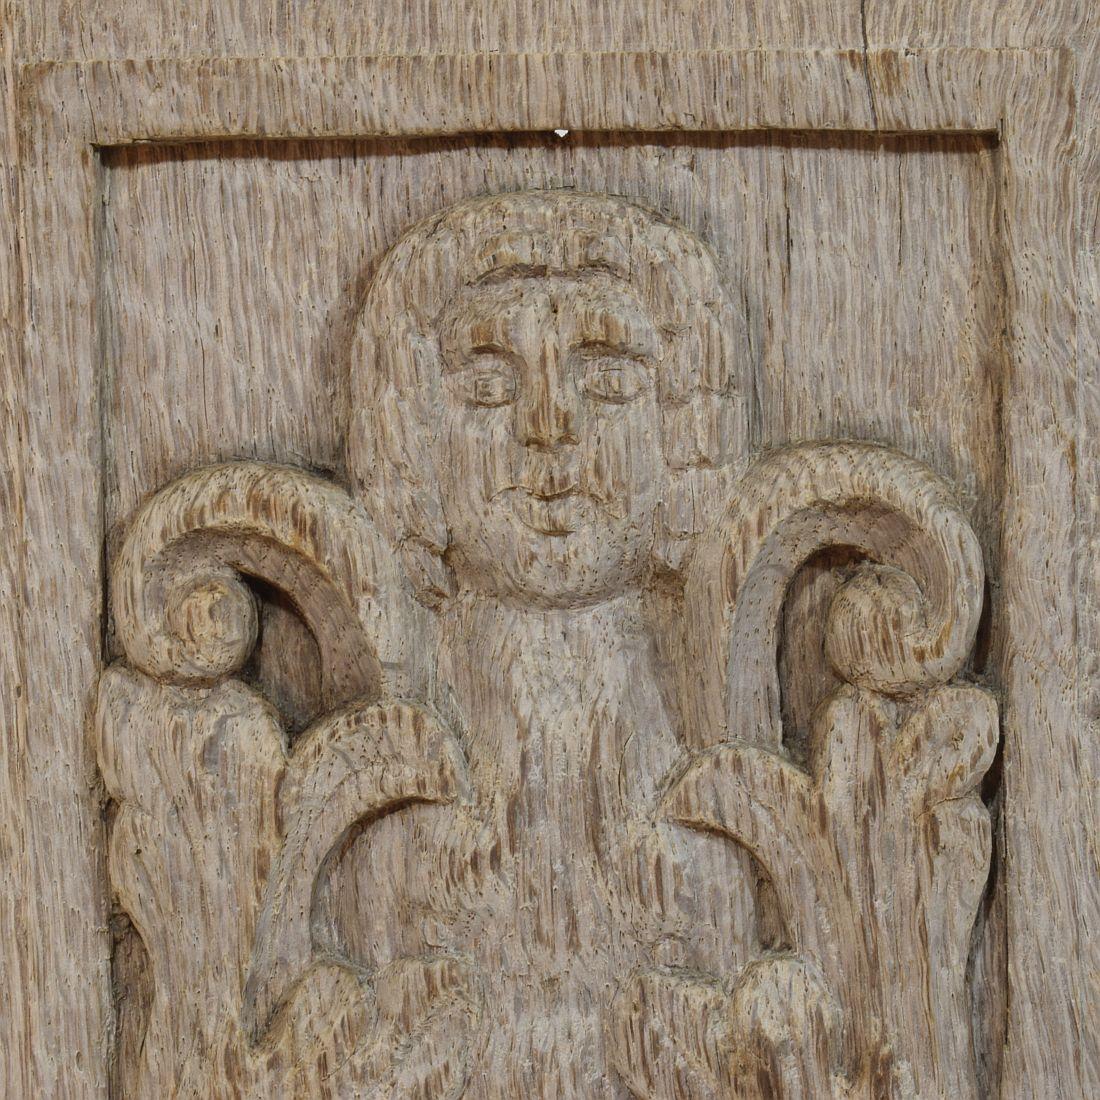 16th-17th Century French Carved Oak Panel with an Angel Figure For Sale 7